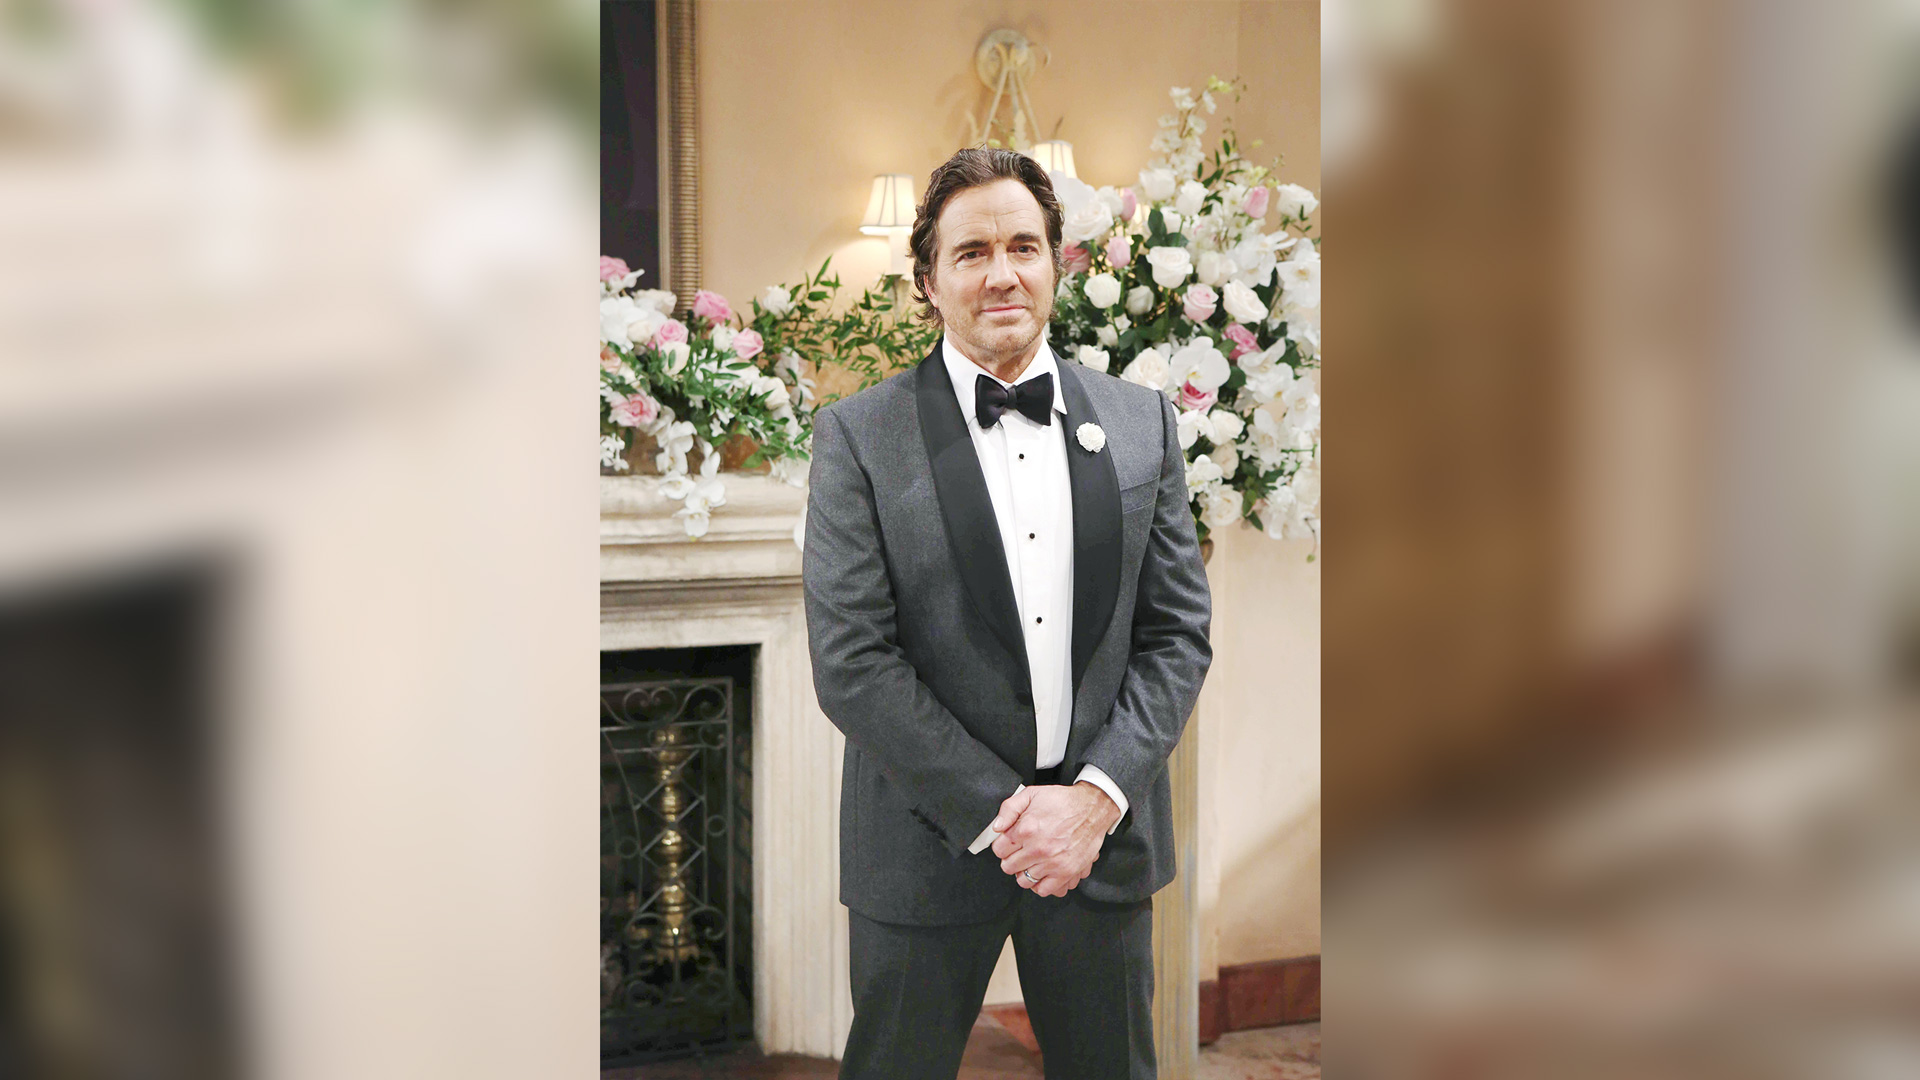 Ridge Forrester (Thorsten Kaye) stands tall in this handsome tuxedo.